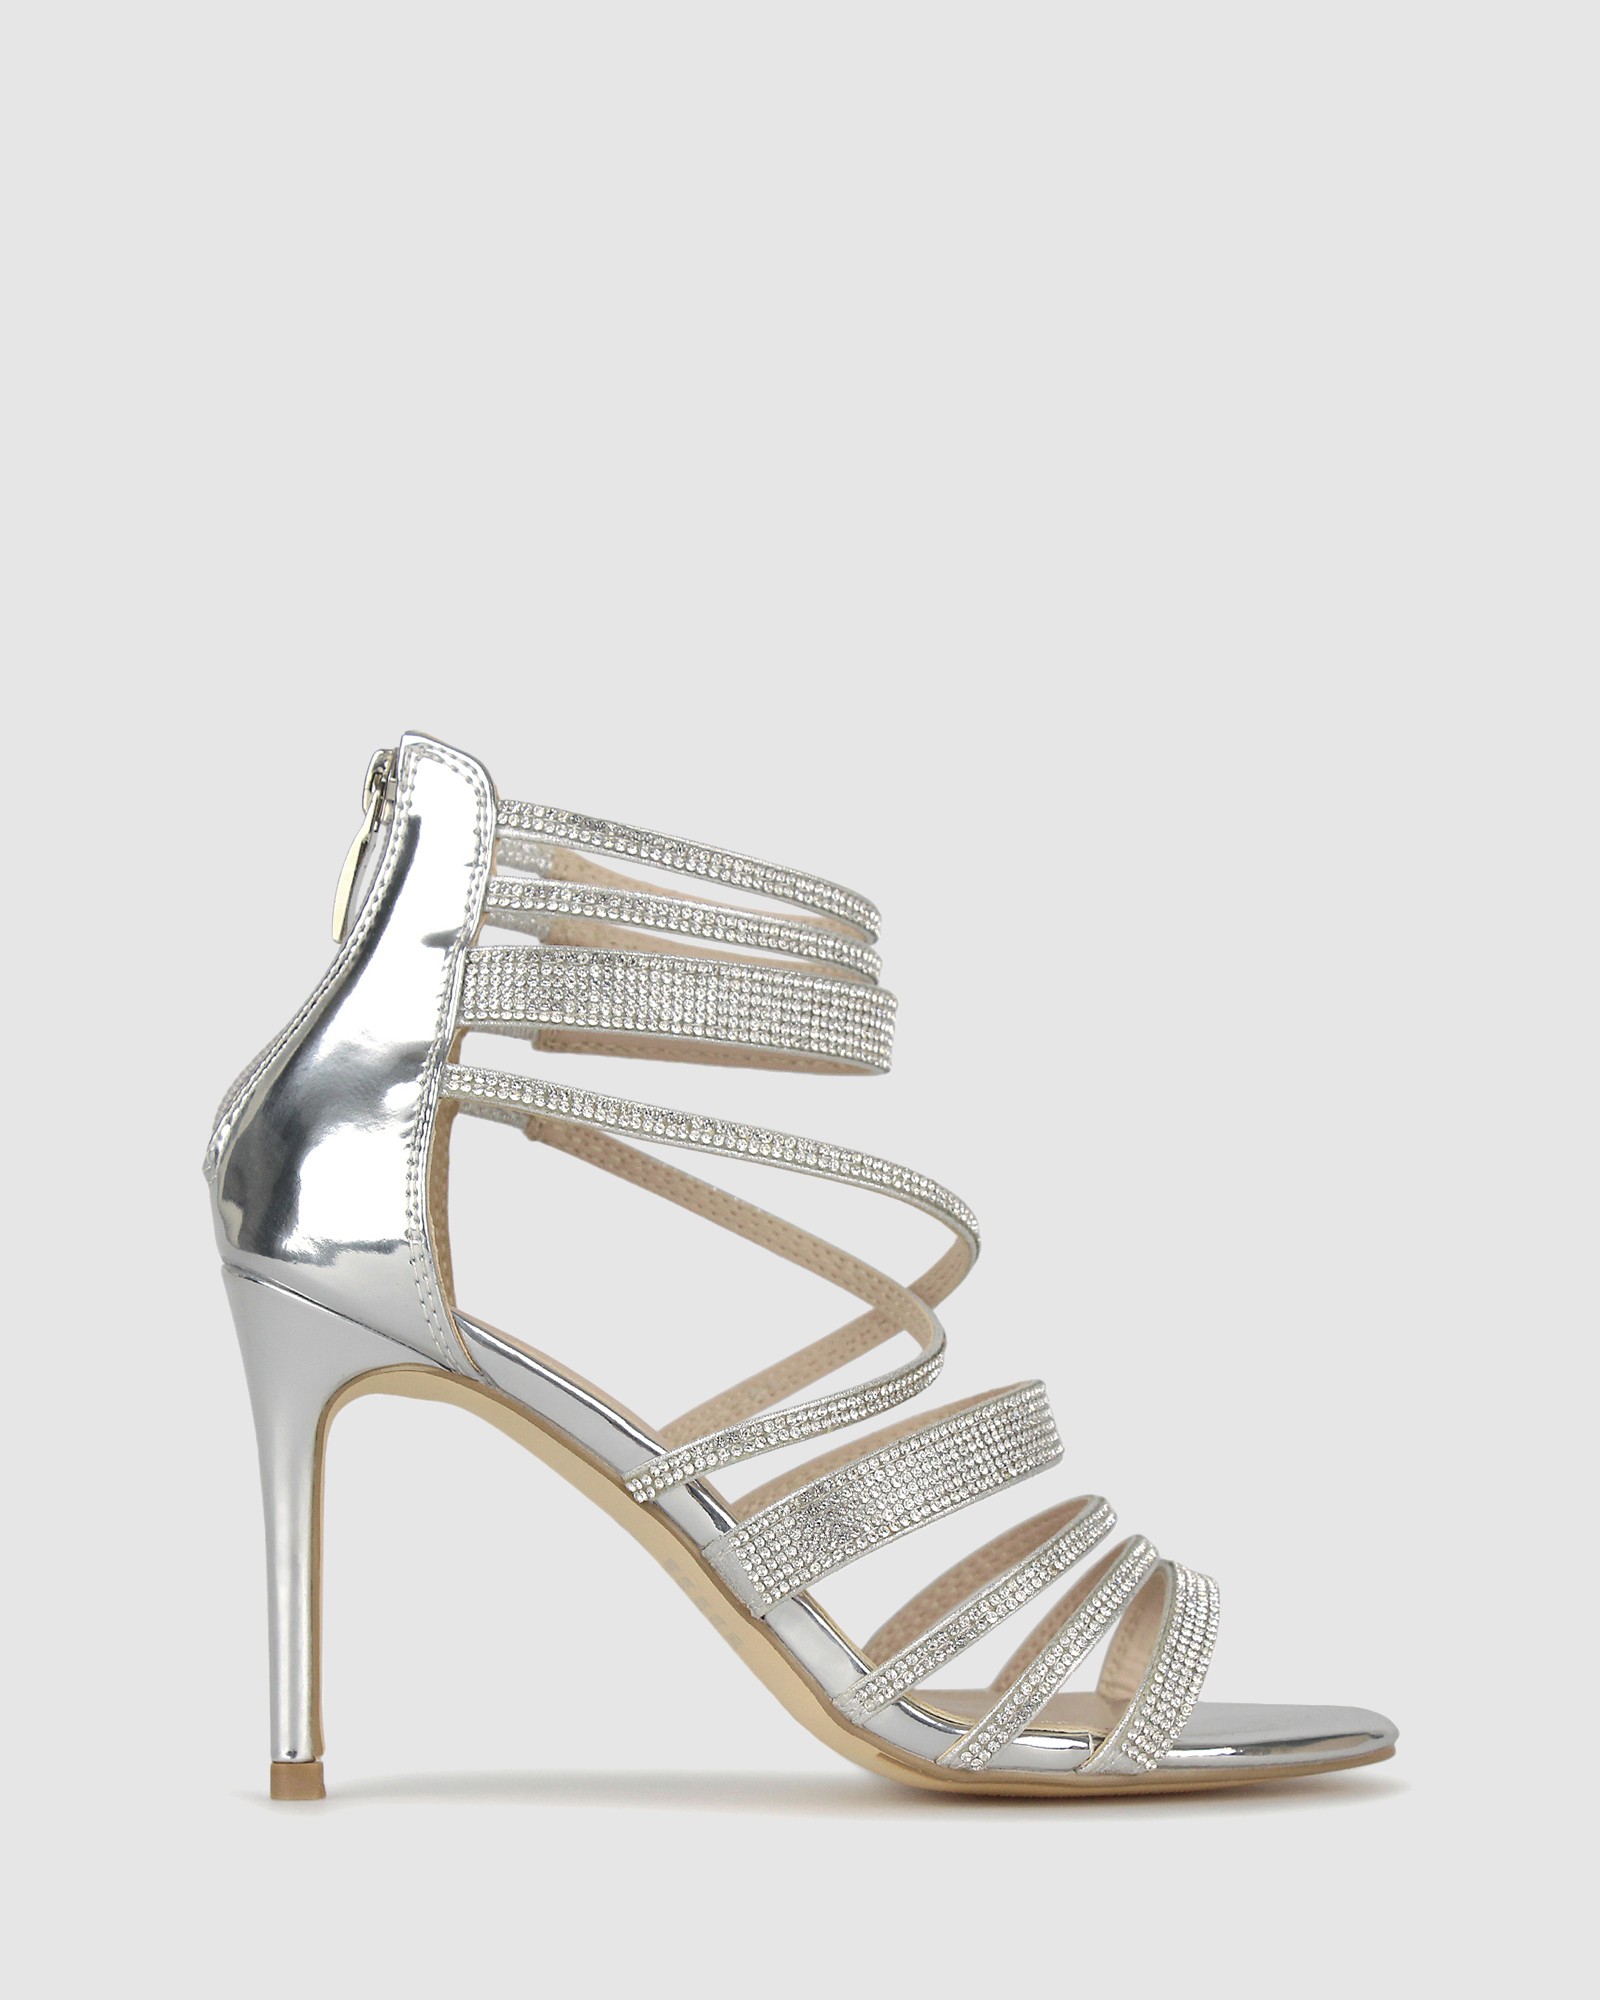 Kandy Diamante Stiletto Sandals Silver by Betts | ShoeSales